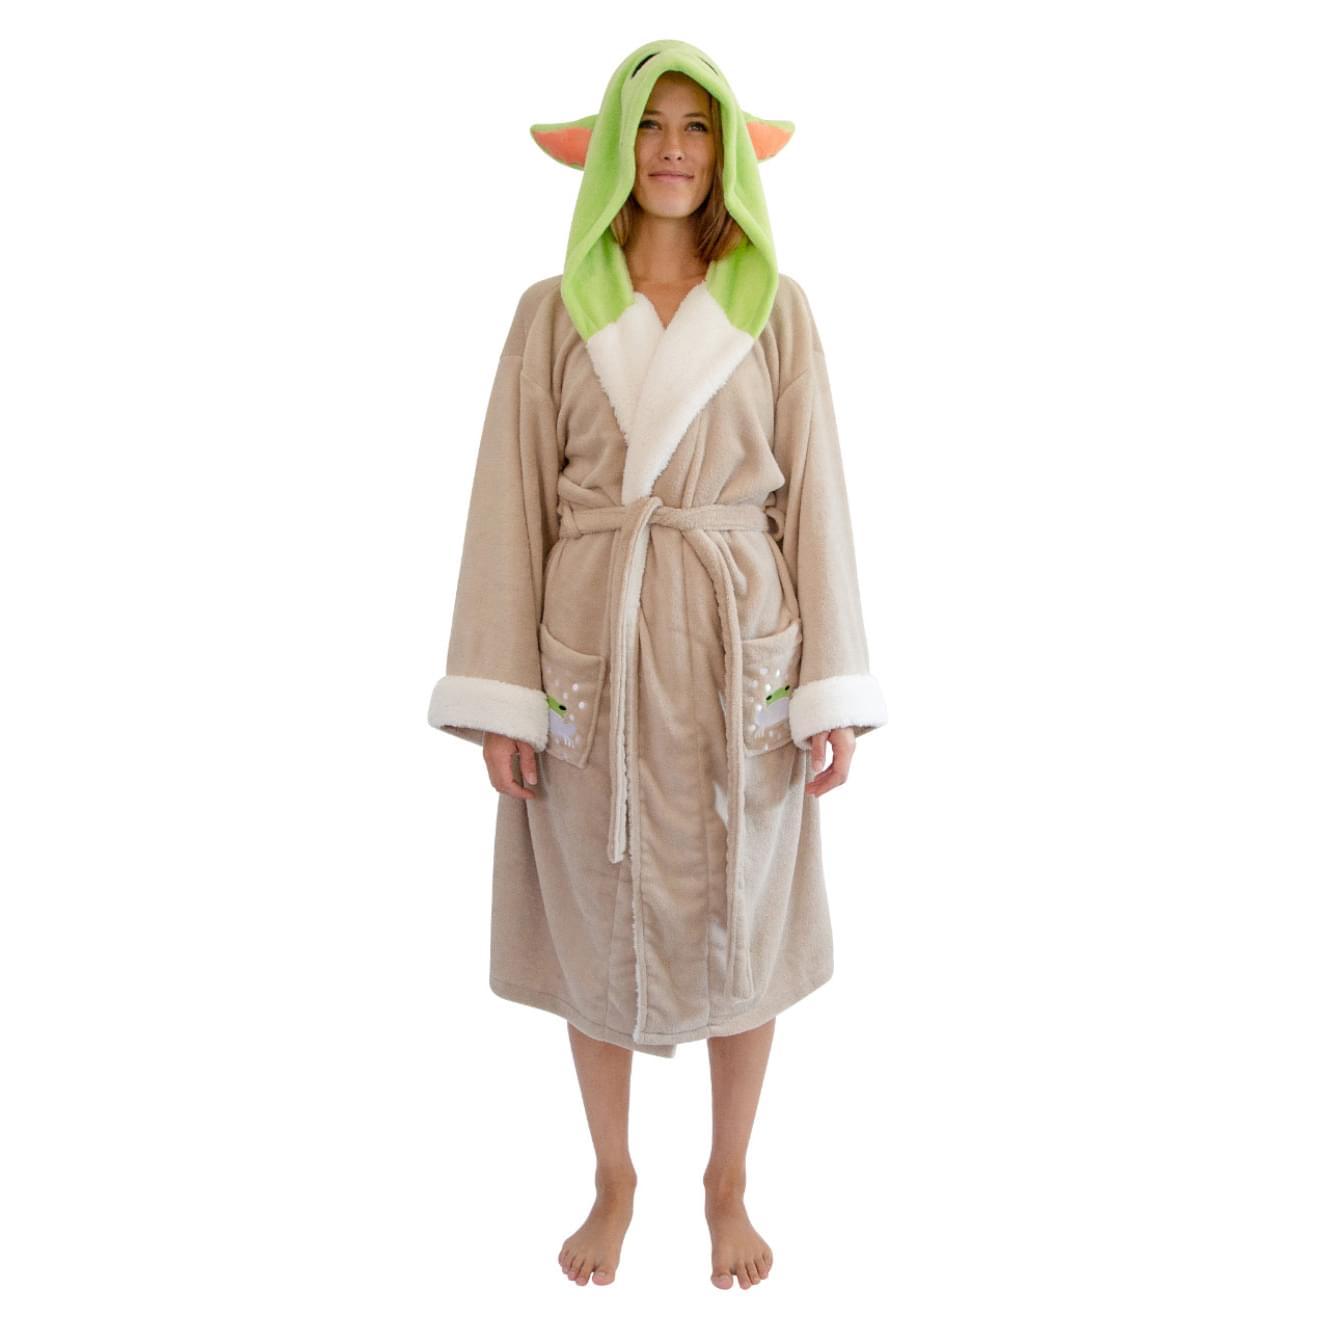 Star Wars: The Mandalorian The Child Bathrobe For Women , One Size Fits Most